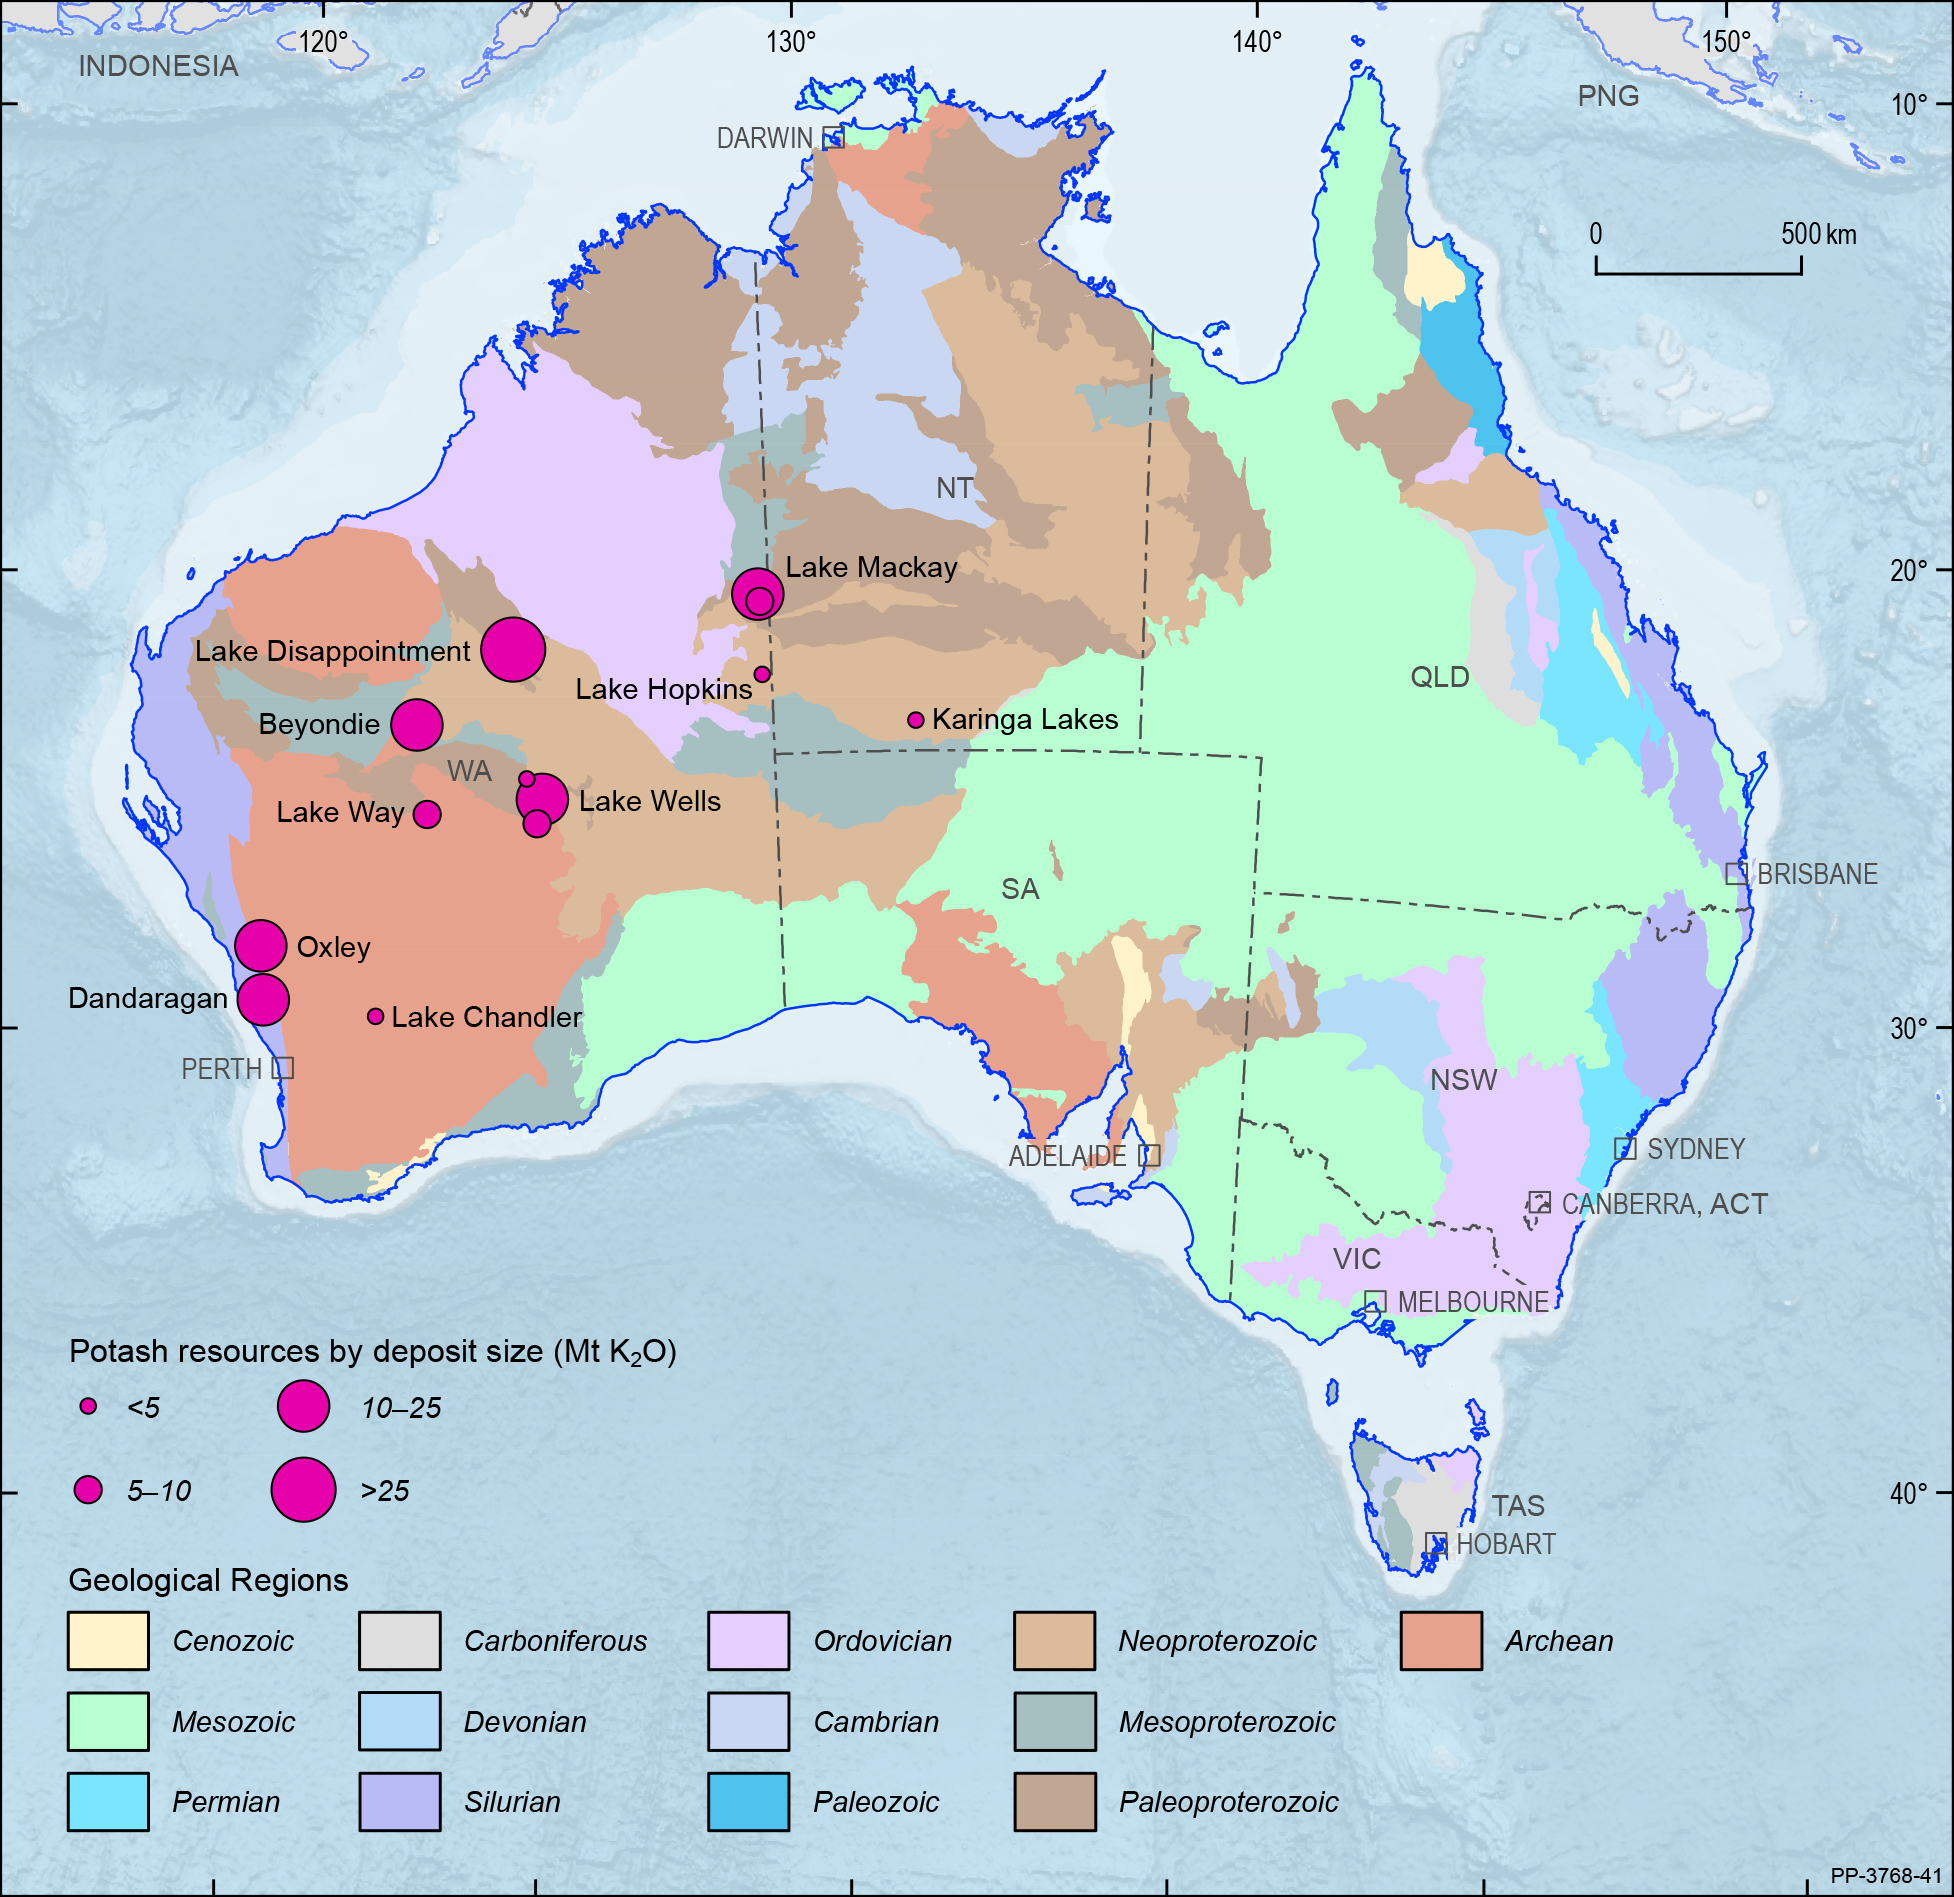 A map showing the Australian continent shaded by the ages of the main geological provinces highlighting the geographical distribution of Australian potash deposits in 2019.